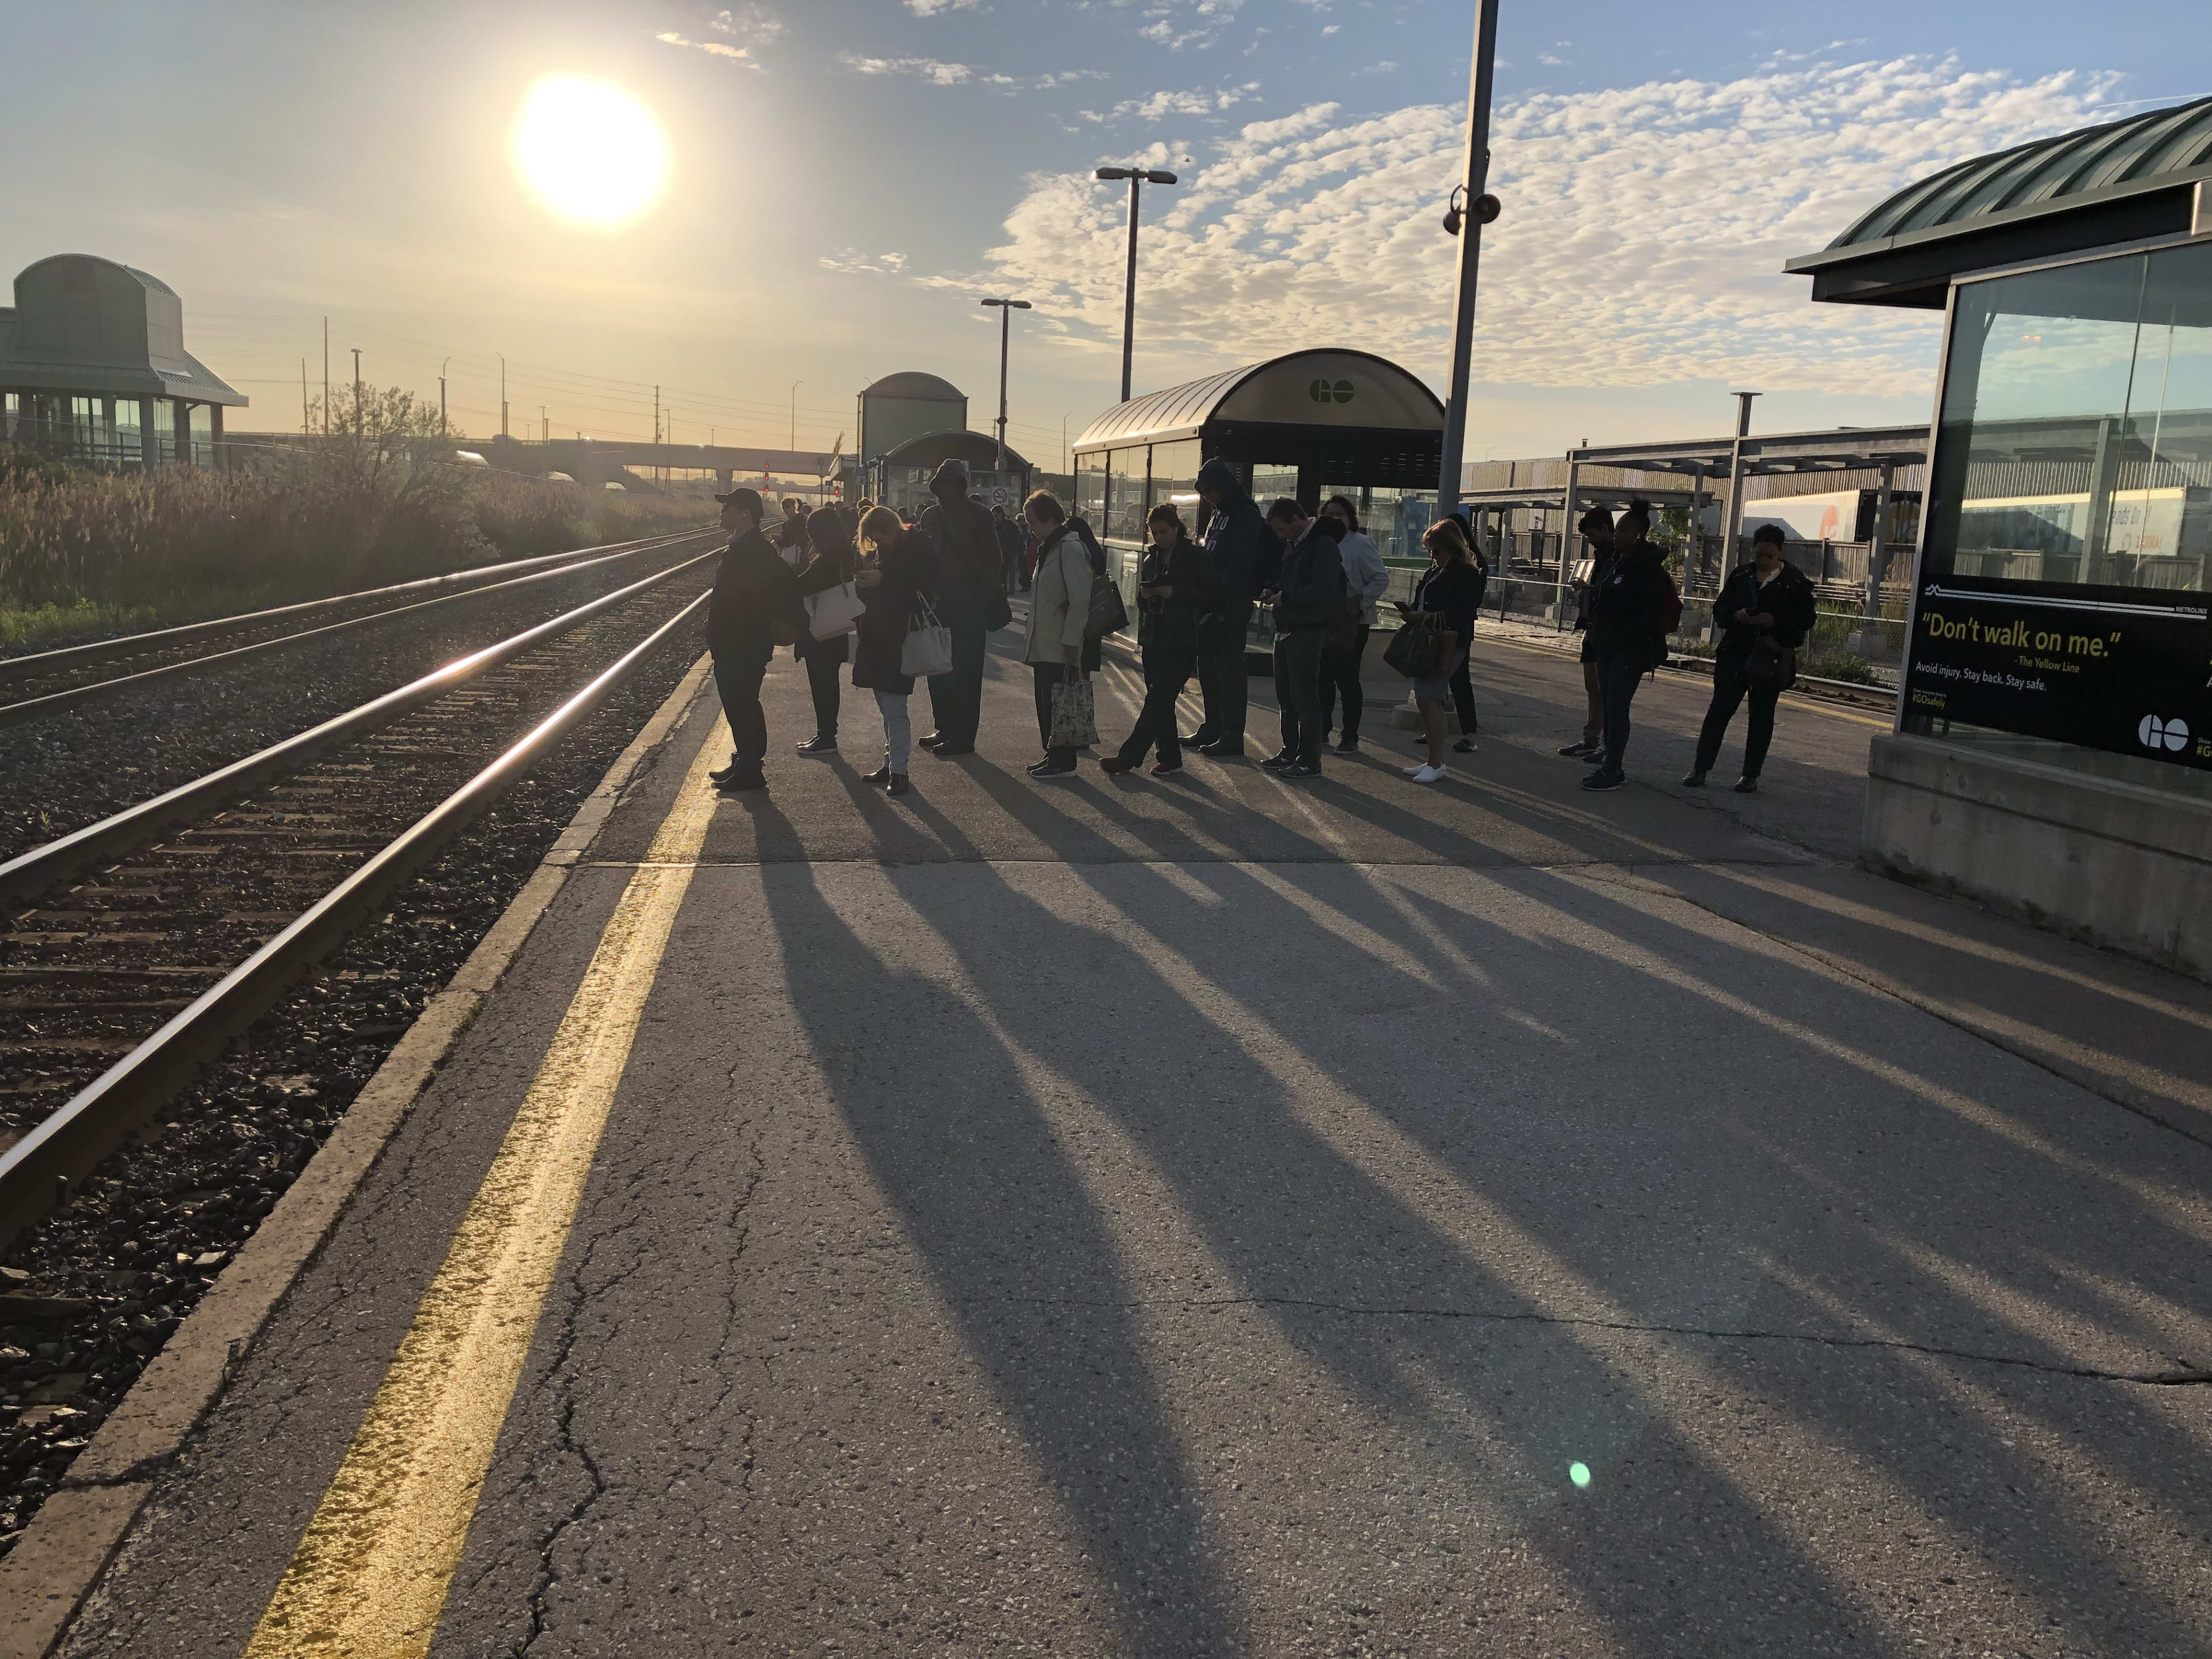 A line of customers produce long shadows on the platform, as an early day sun rises behind them.